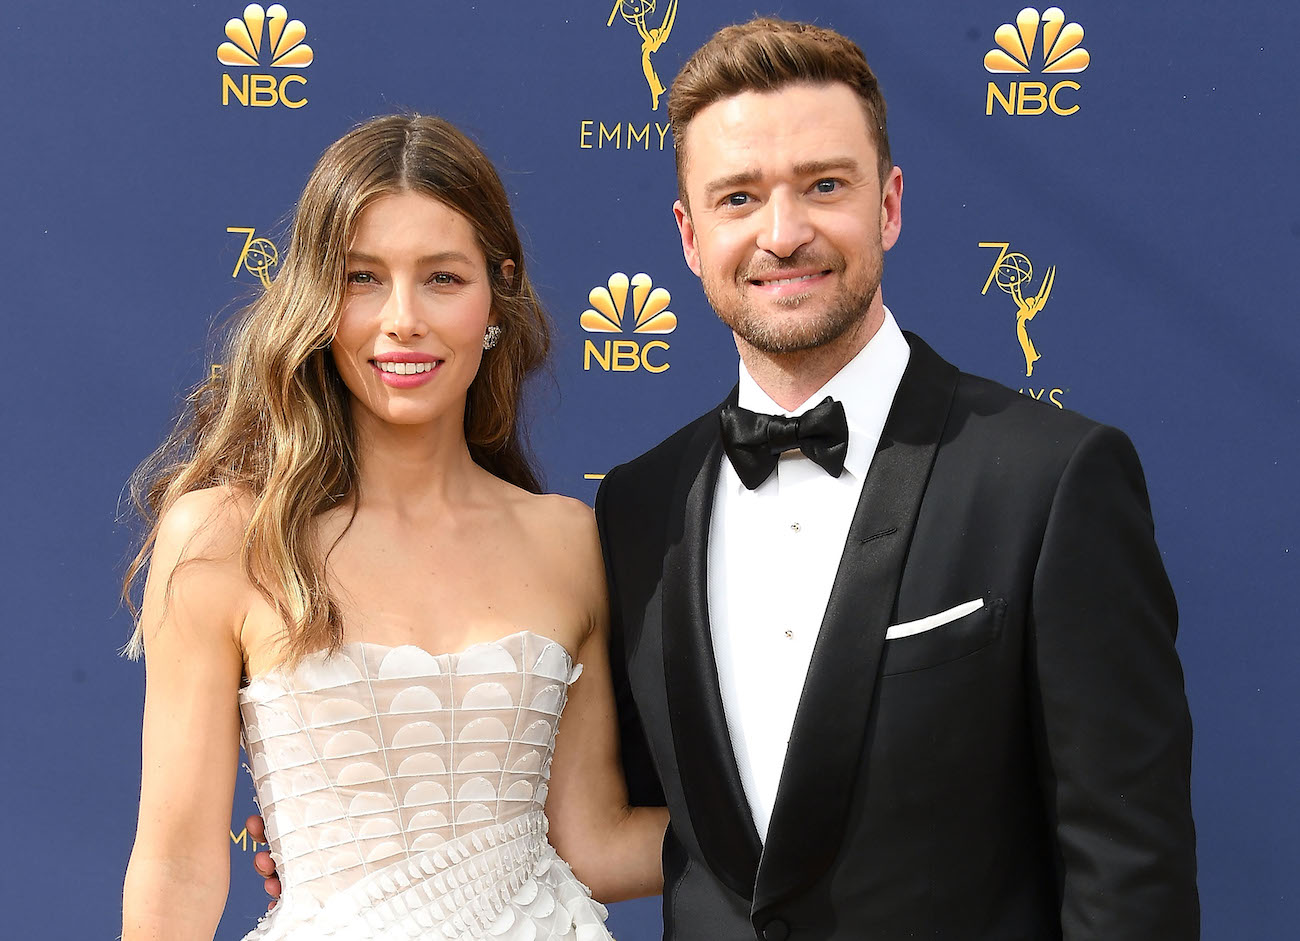 Jessica Biel wearing a white outfit and posing next to Justin Timberlake, who is wearing a black tuxedo